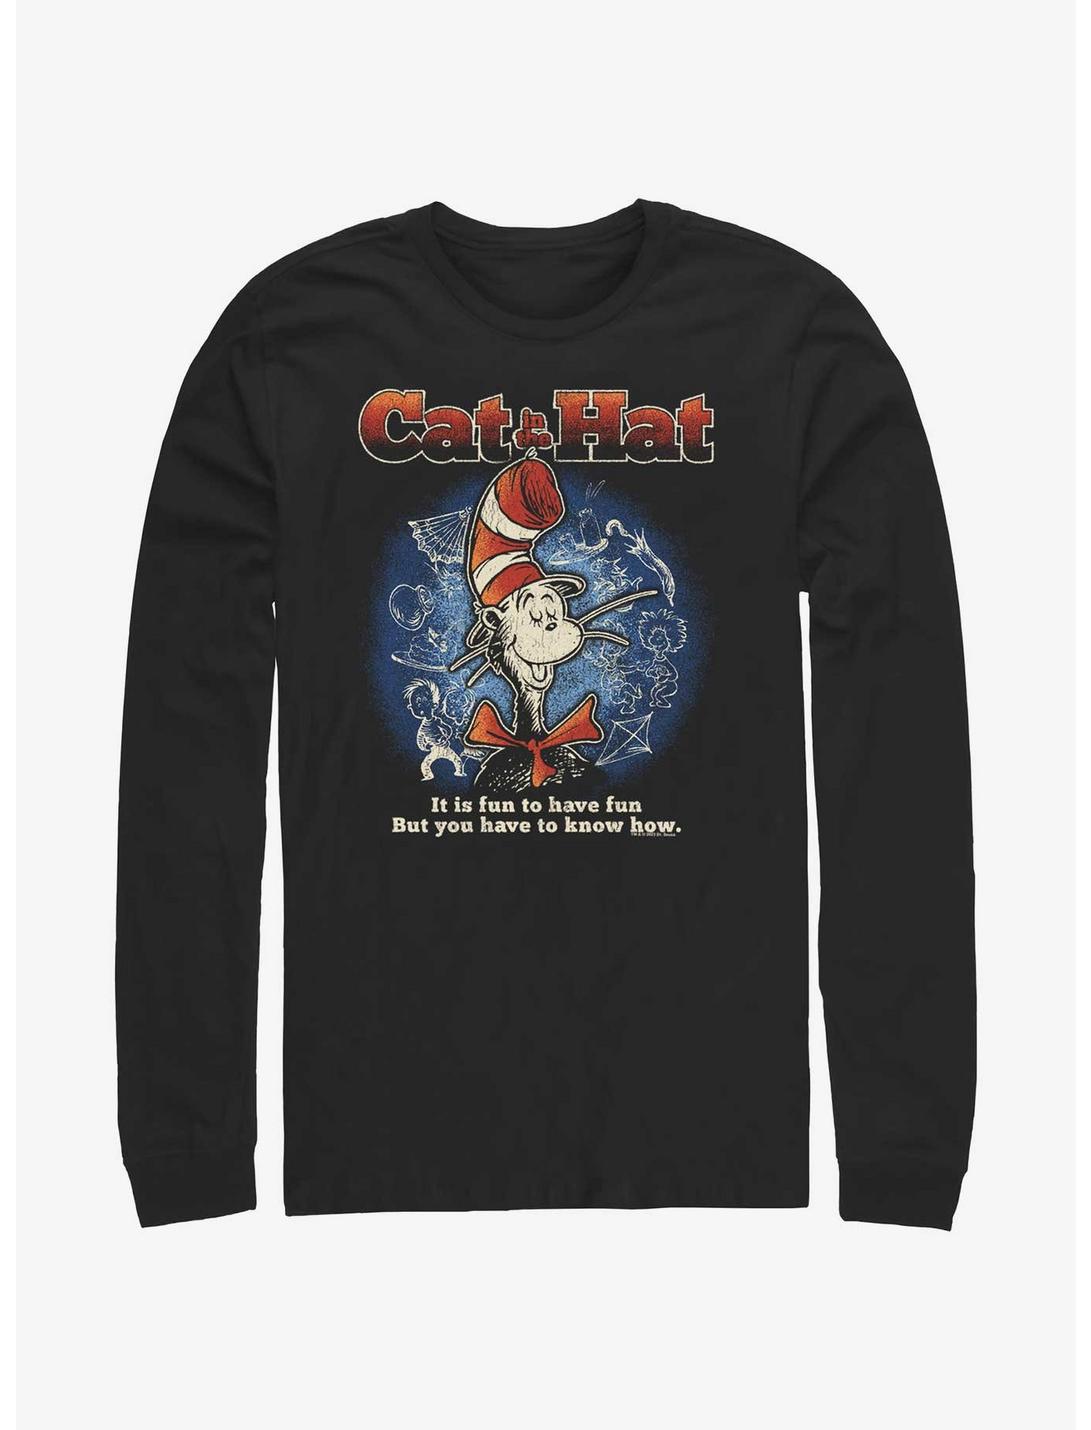 Dr. Seuss's Cat In The Hat Fun To Have Fun Long-Sleeve T-Shirt, BLACK, hi-res